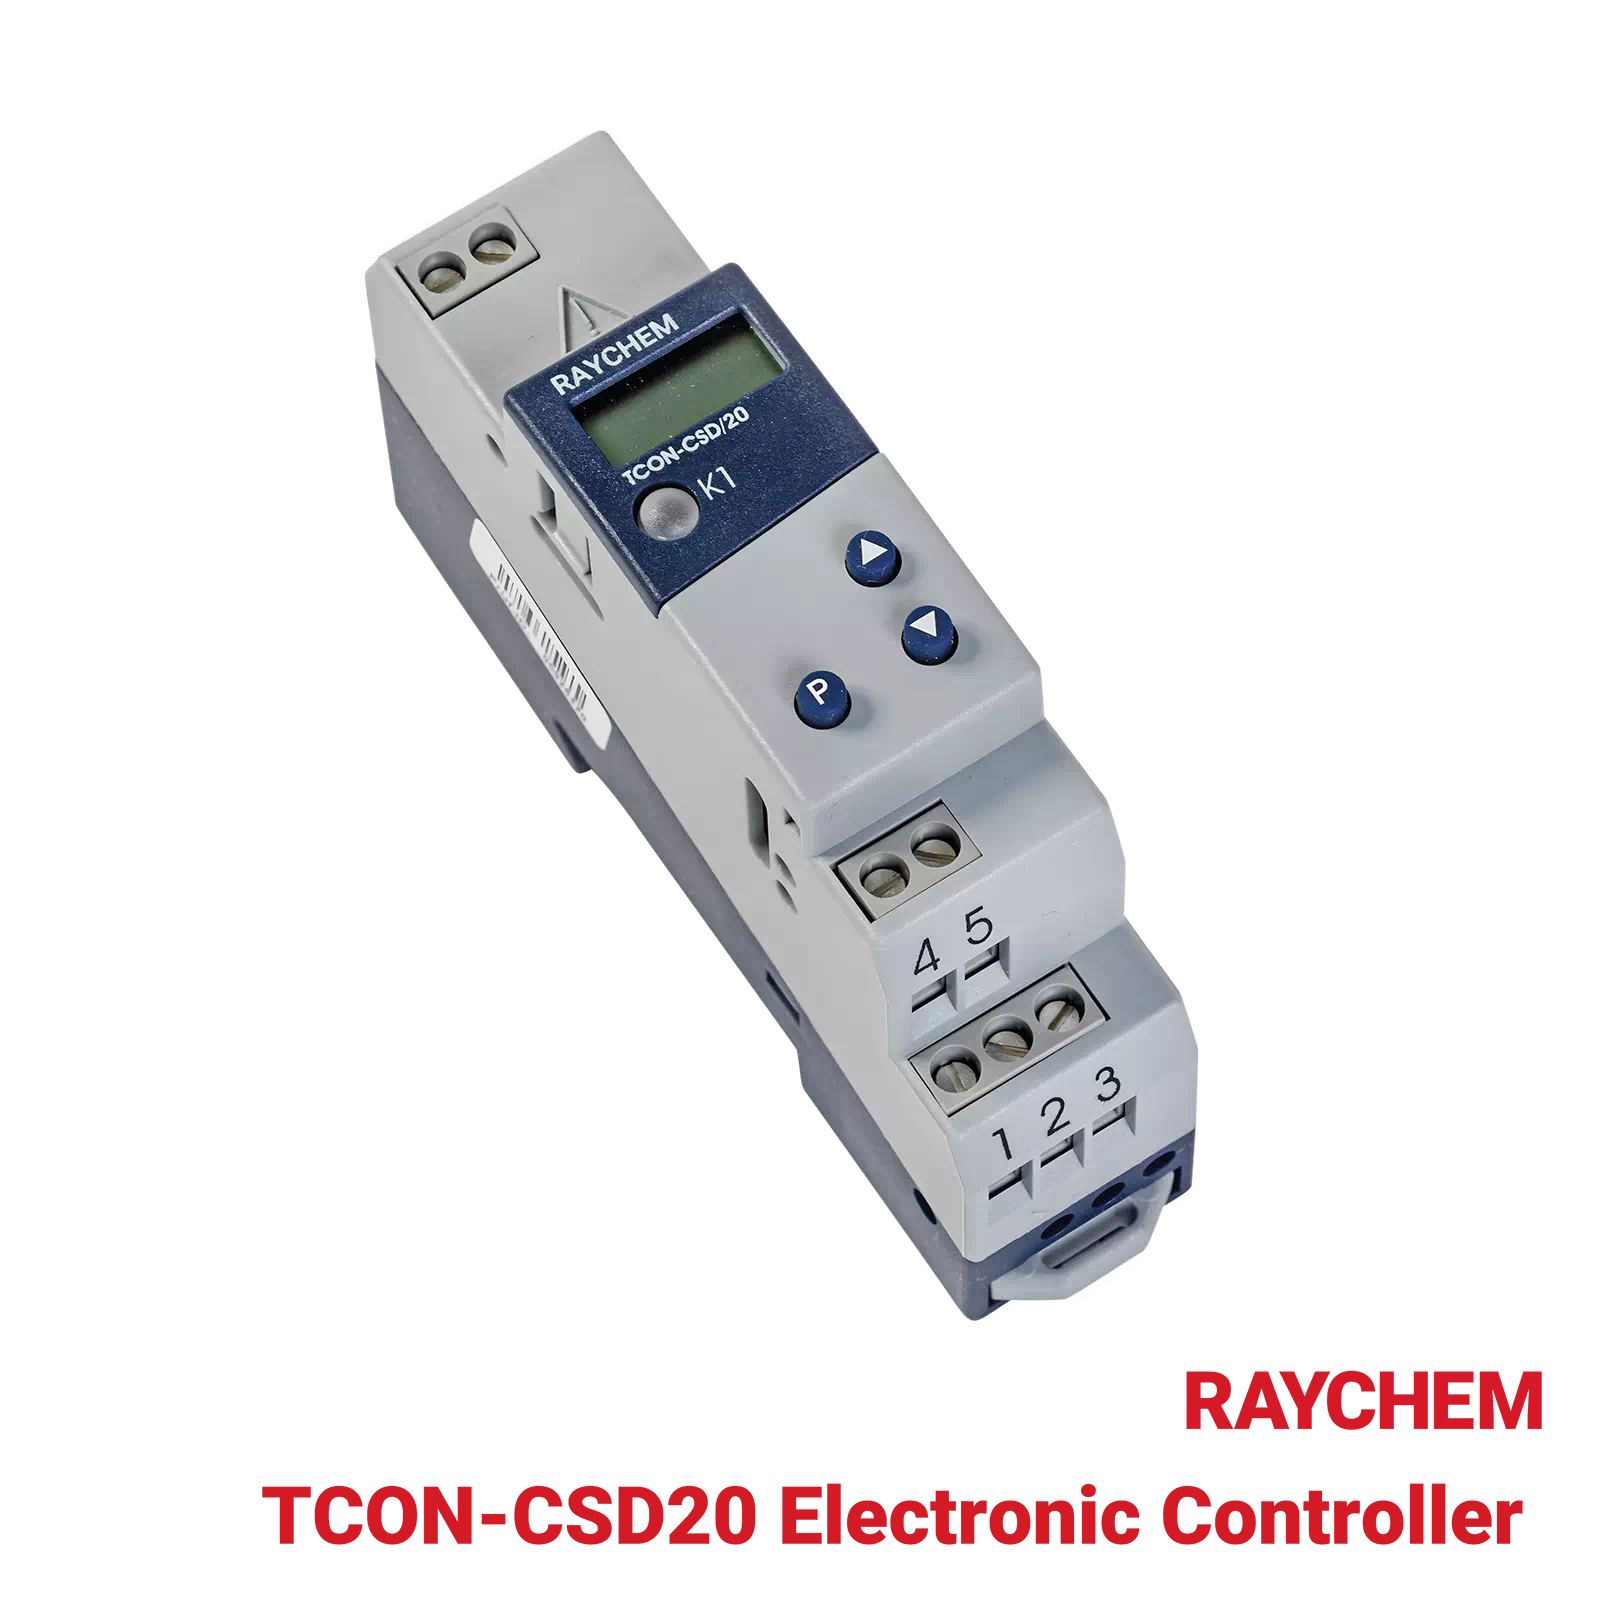 TCON-CSD20-Electronic-Controller-Raychem-Industrial-Heating